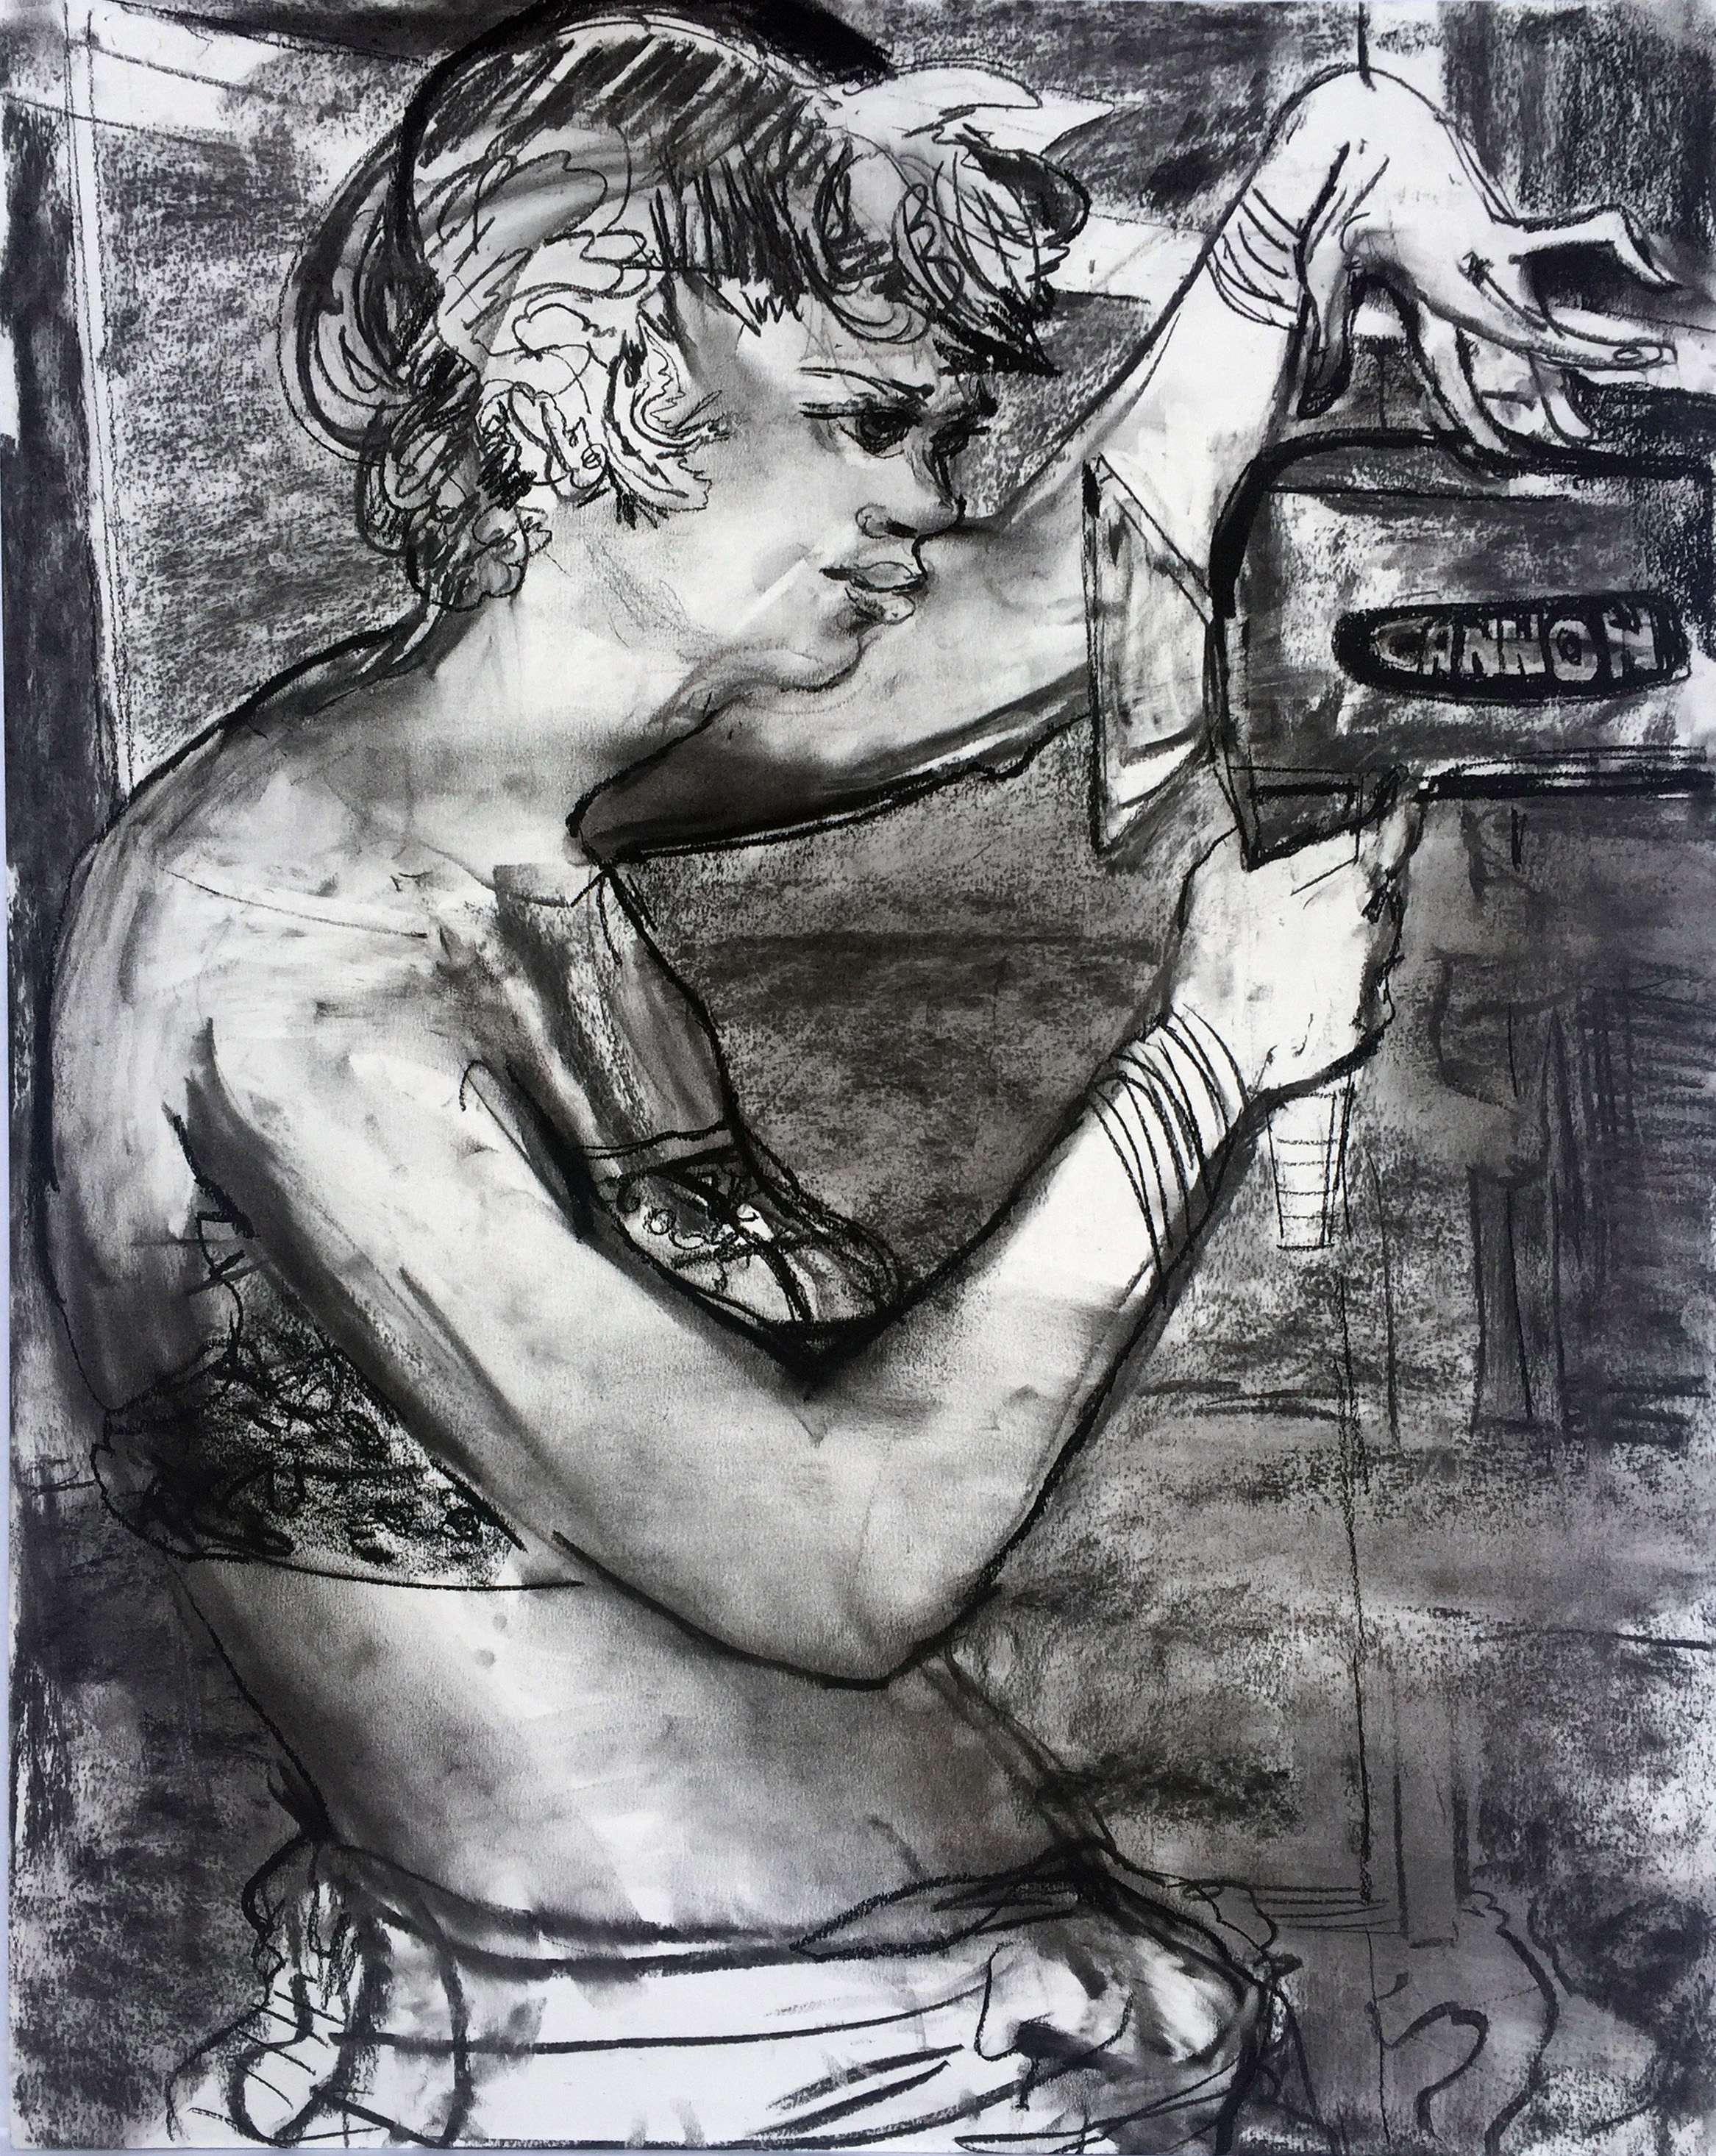 Camera Mom J Baker18 by 24 inches charcoal on paper 2017.jpg